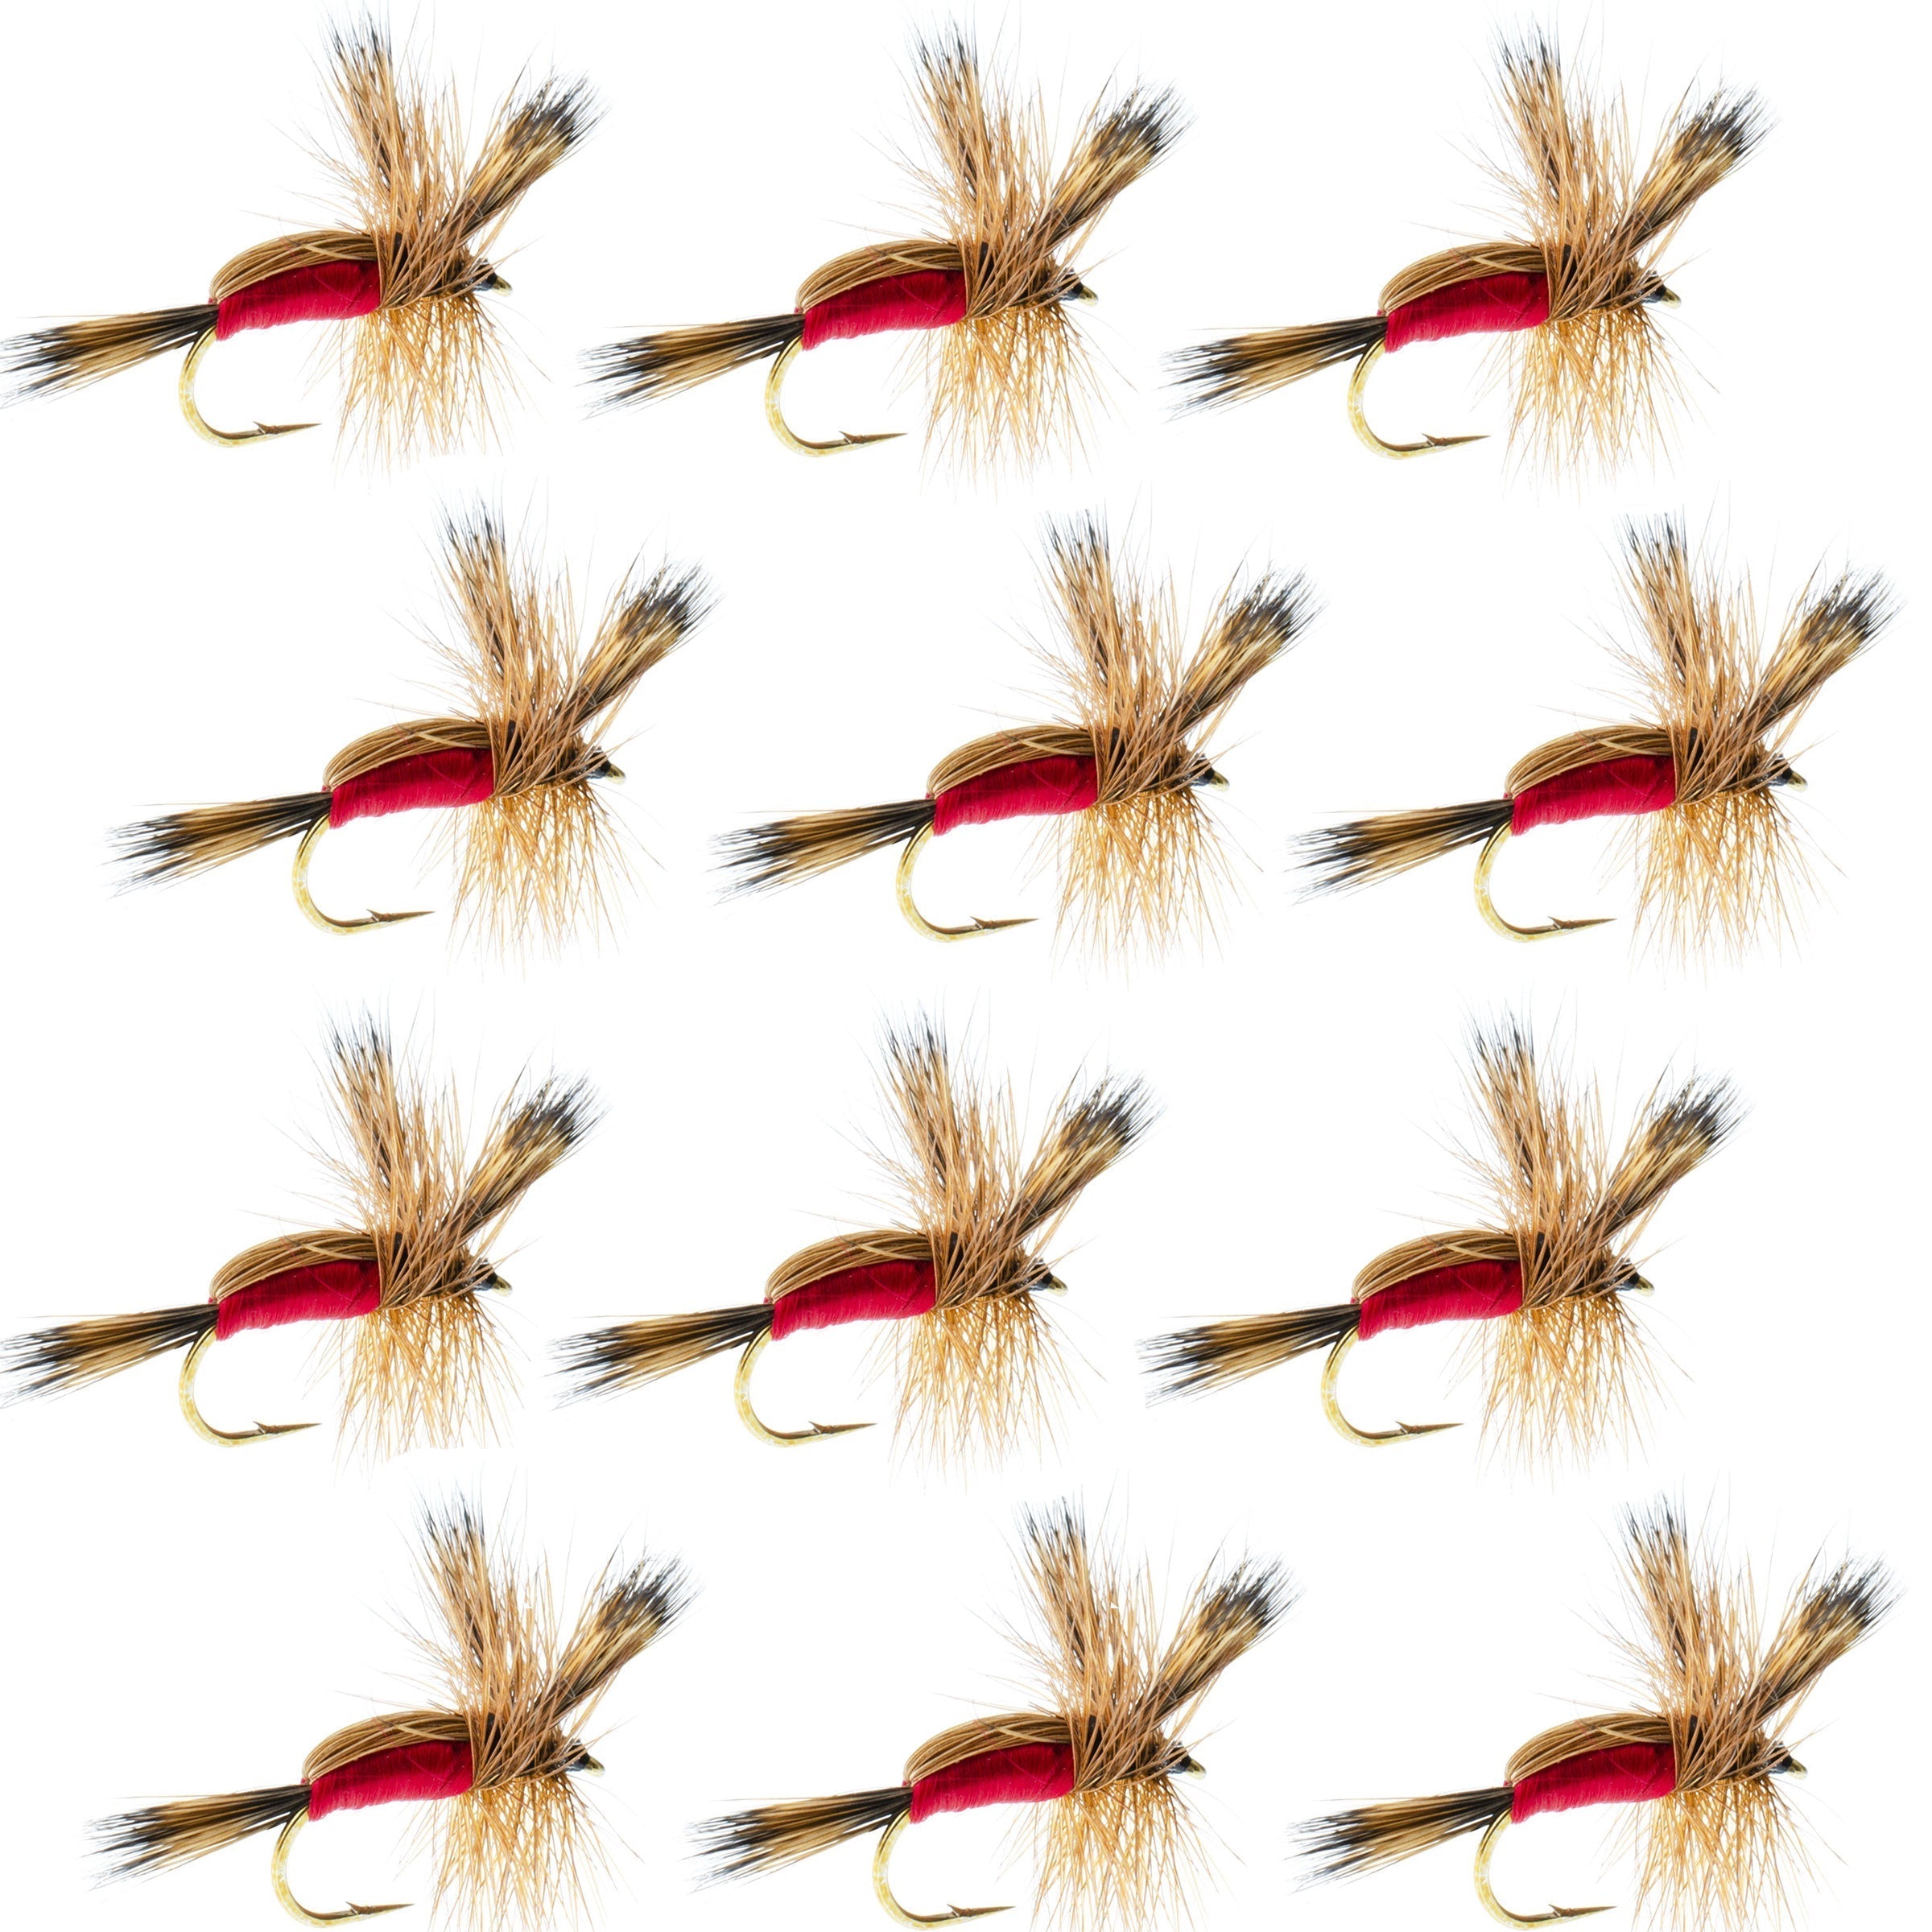 Red Humpy Classic Hair Wing Dry Fly - 1 Dozen Flies Hook Size 16